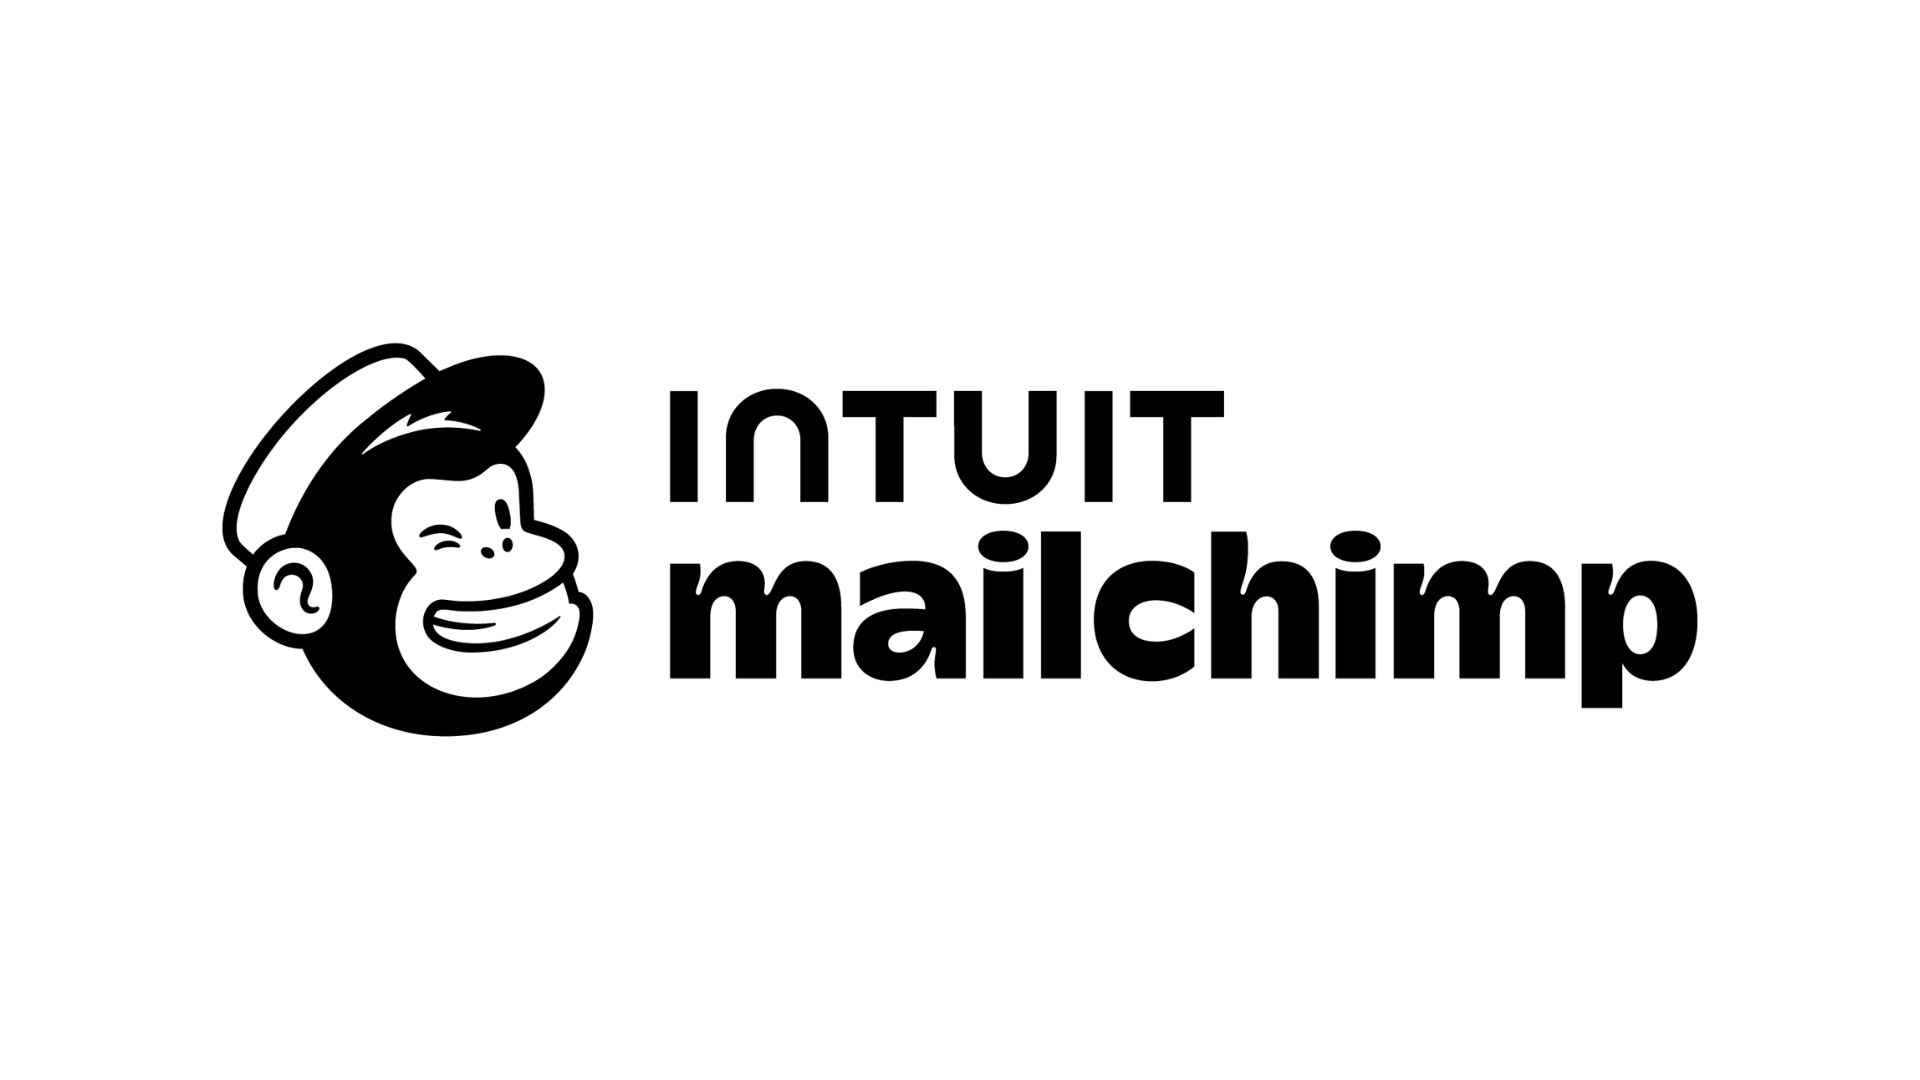 Intuit Mailchimp Announces Australian Debut of From: Here, To: There